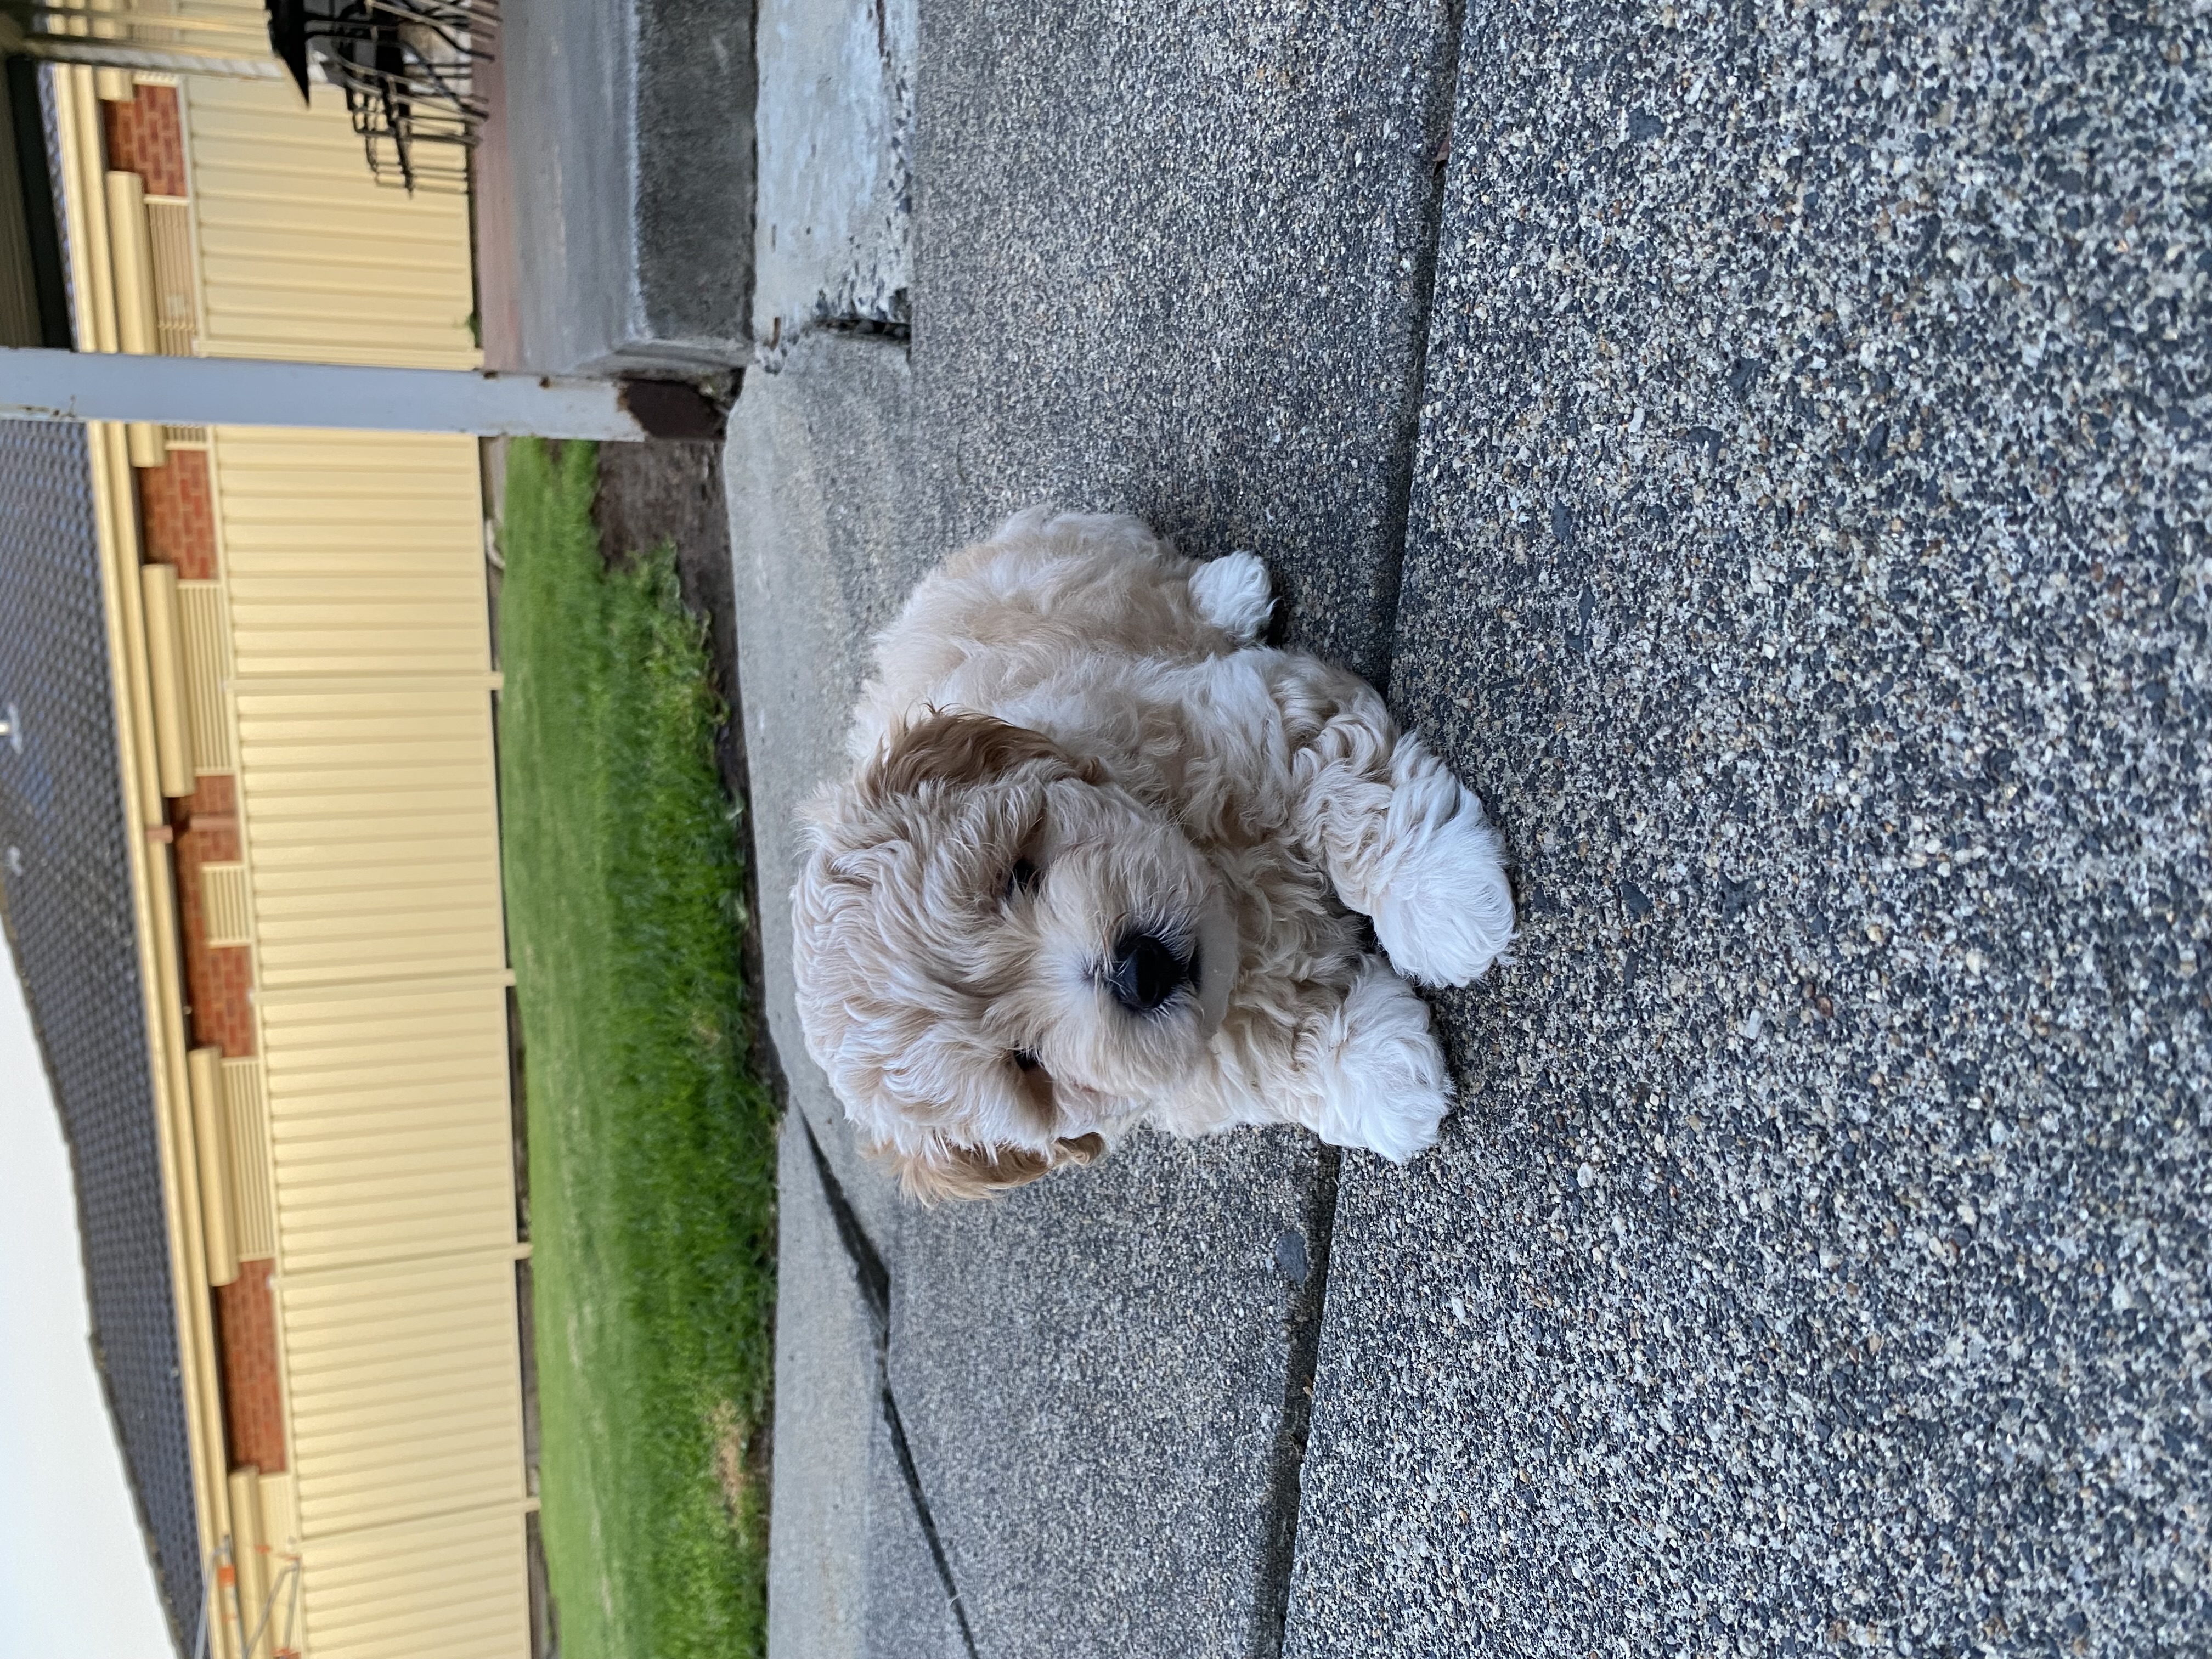 Moodle Puppies- Avondale Heights